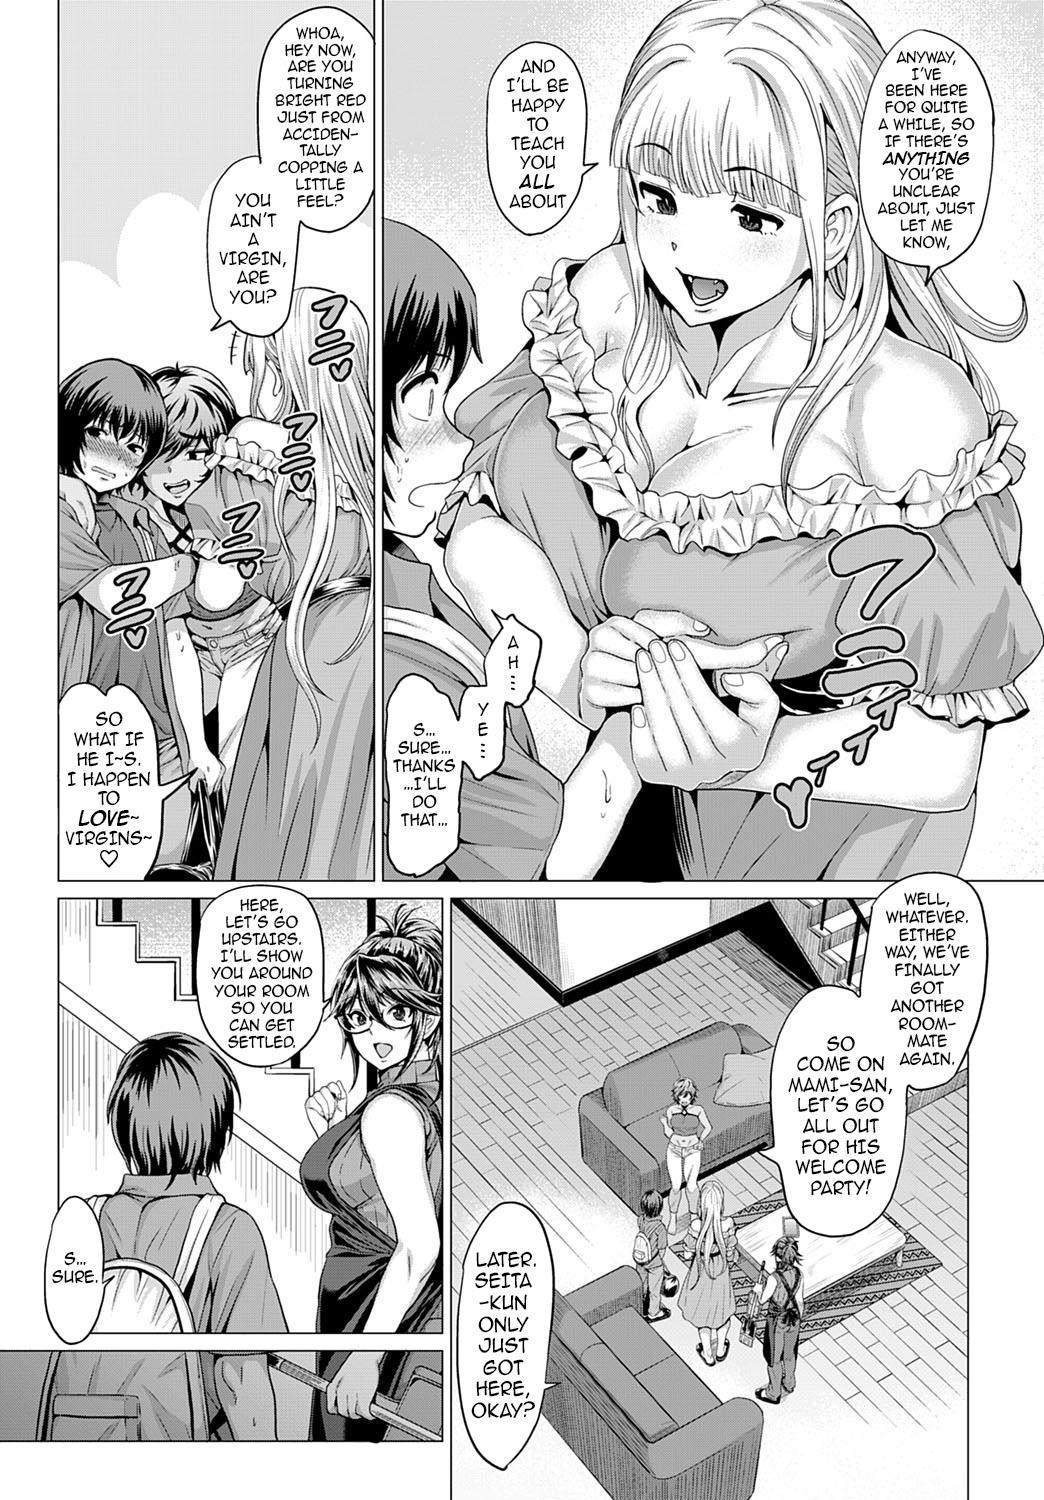 Euro Porn Succubus Share House e Youkoso! | Welcome to the Succubus Shared House! Swedish - Page 3